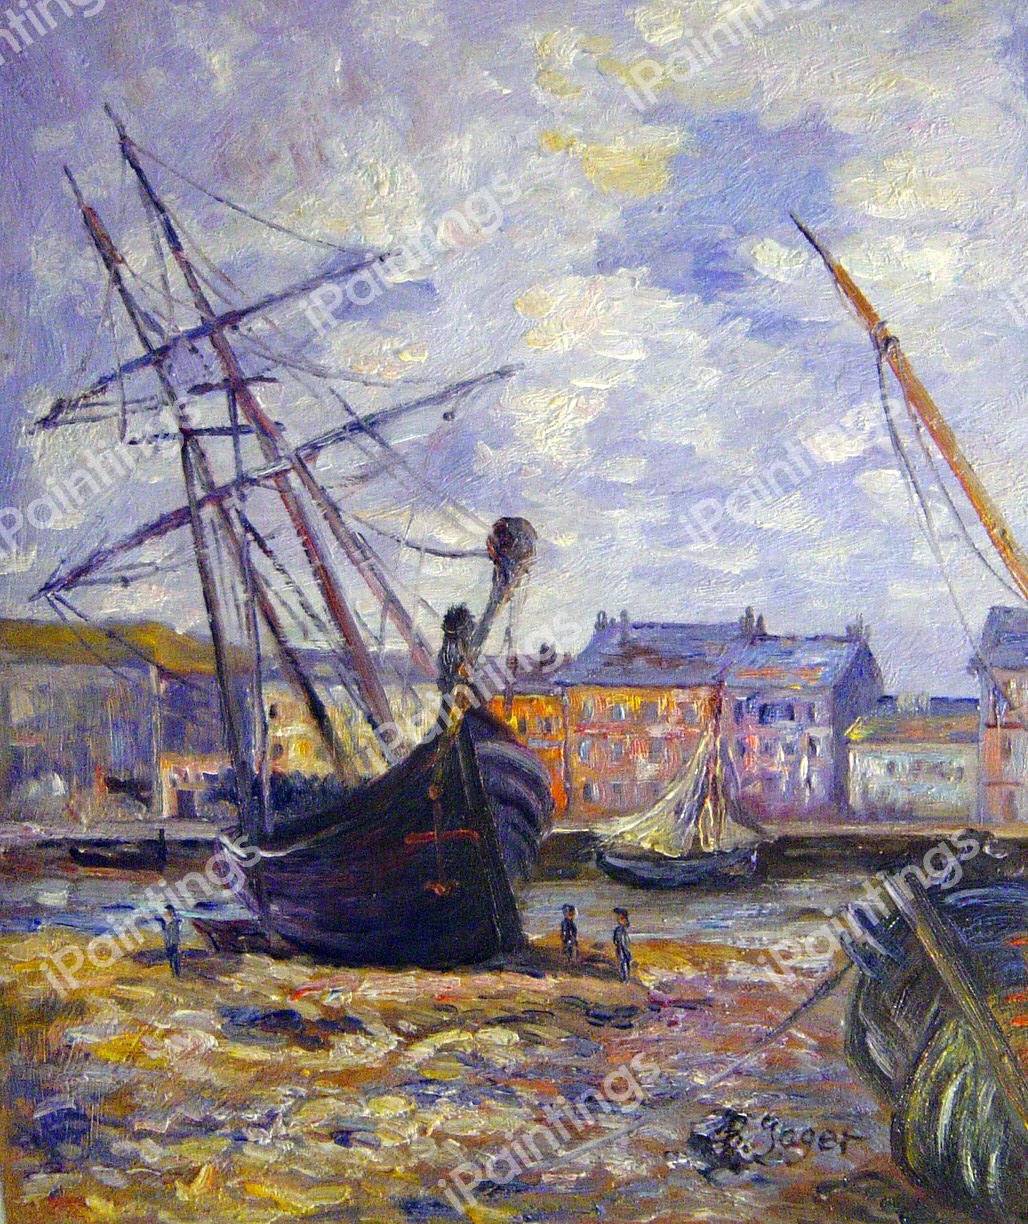 Boat at Low Tide at Fecamp by Claude Monet Impressionism Wall Decor Small 8x10 